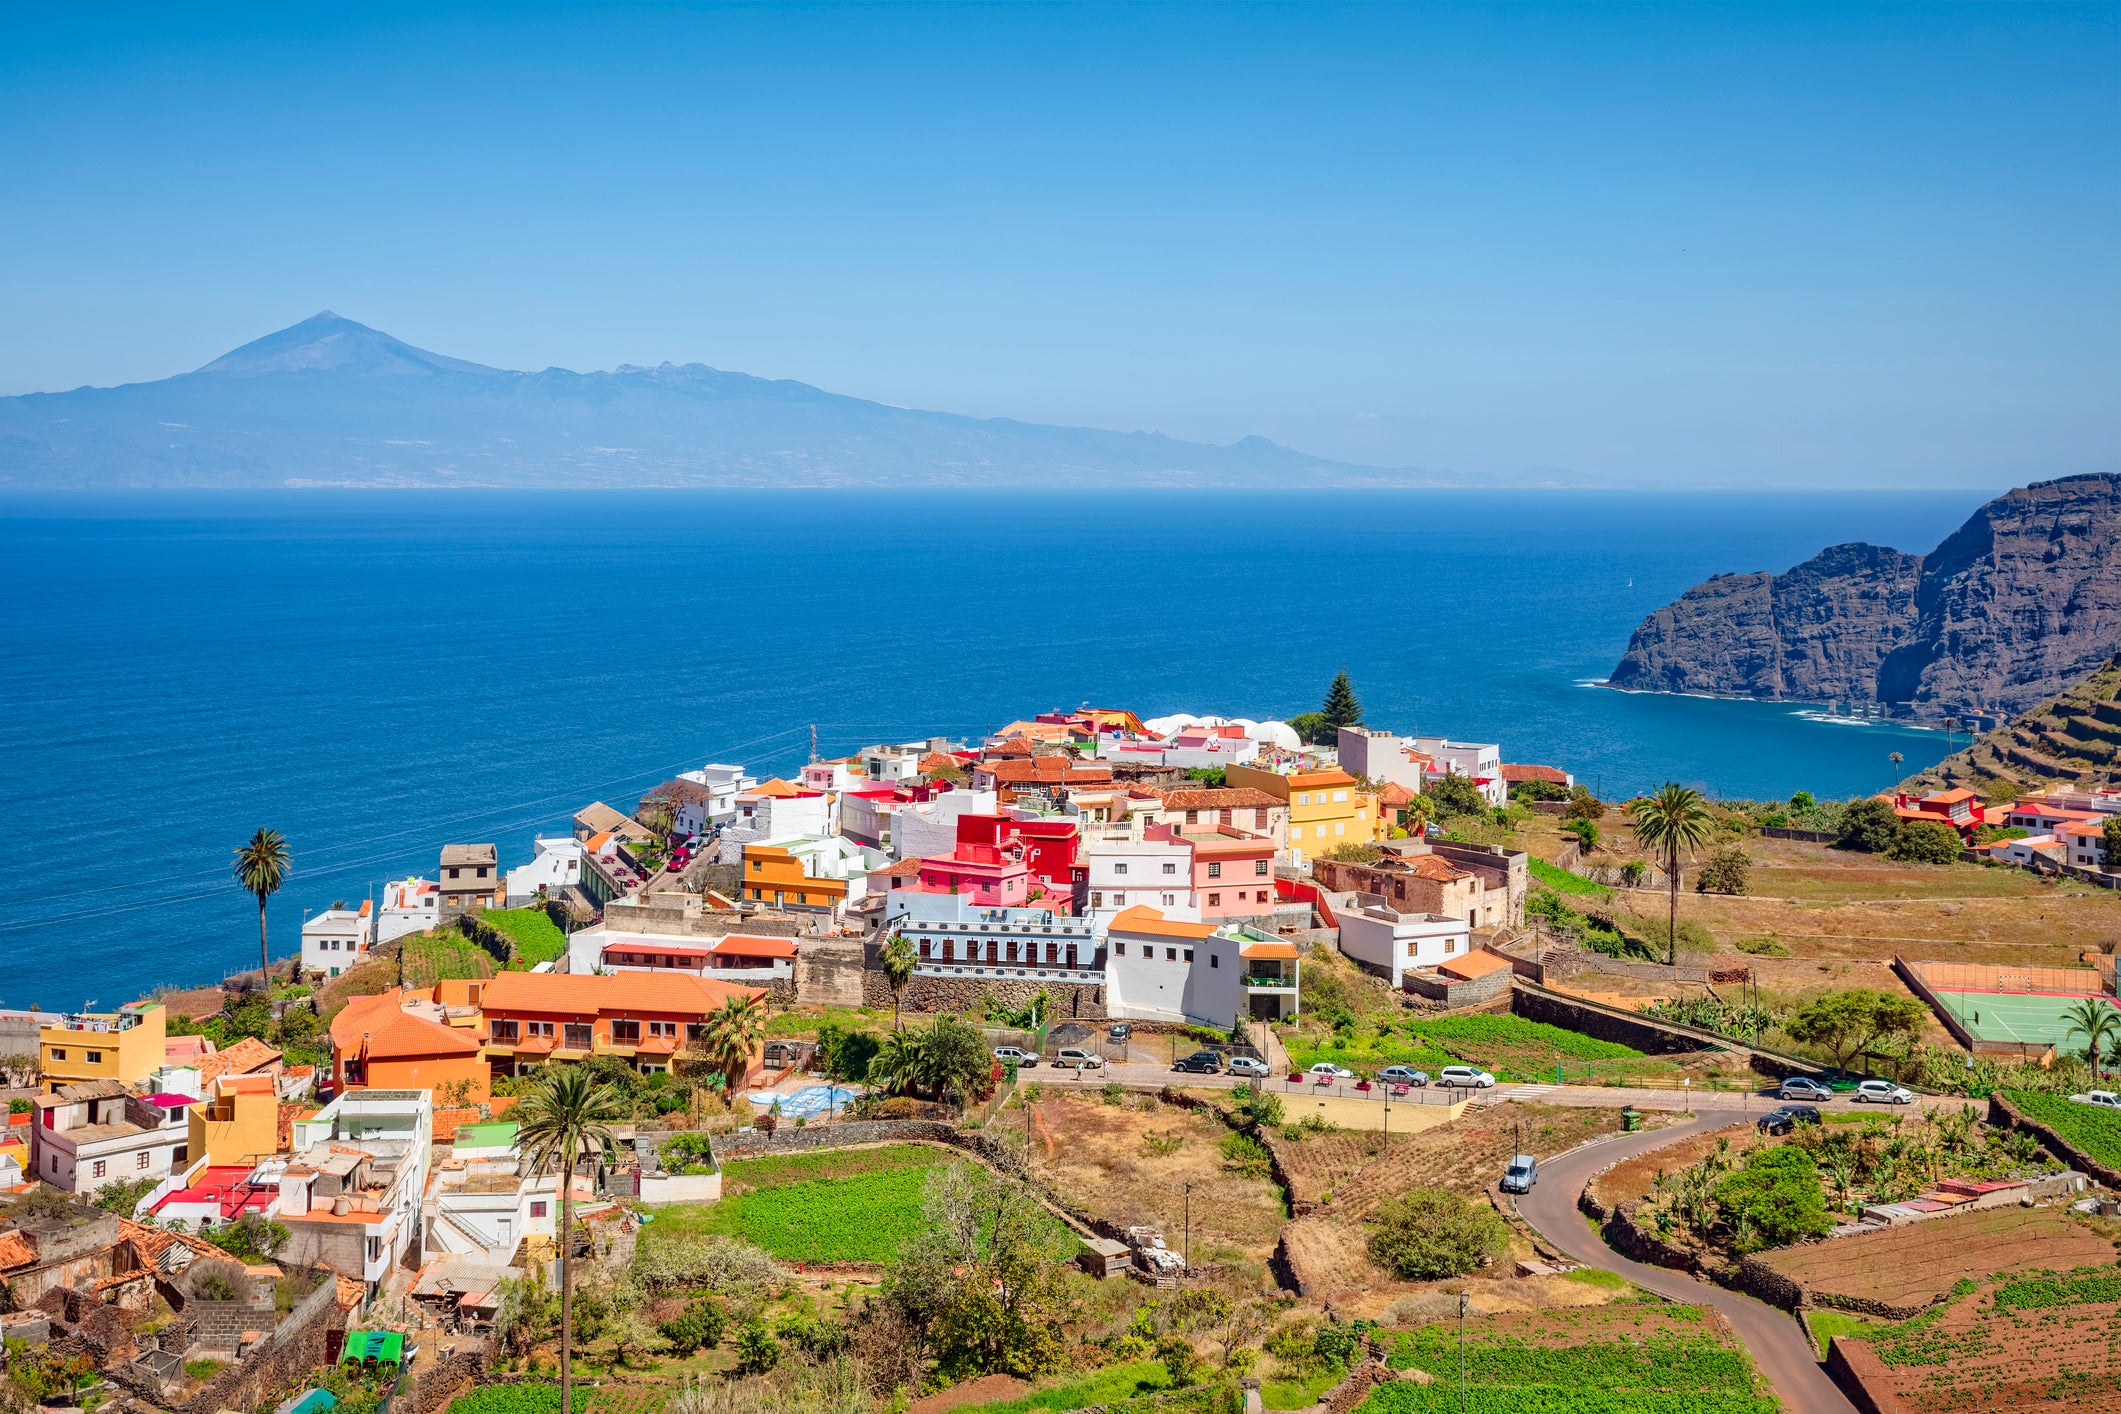 Swap sweltering mainland Spain for the milder Canaries this summer